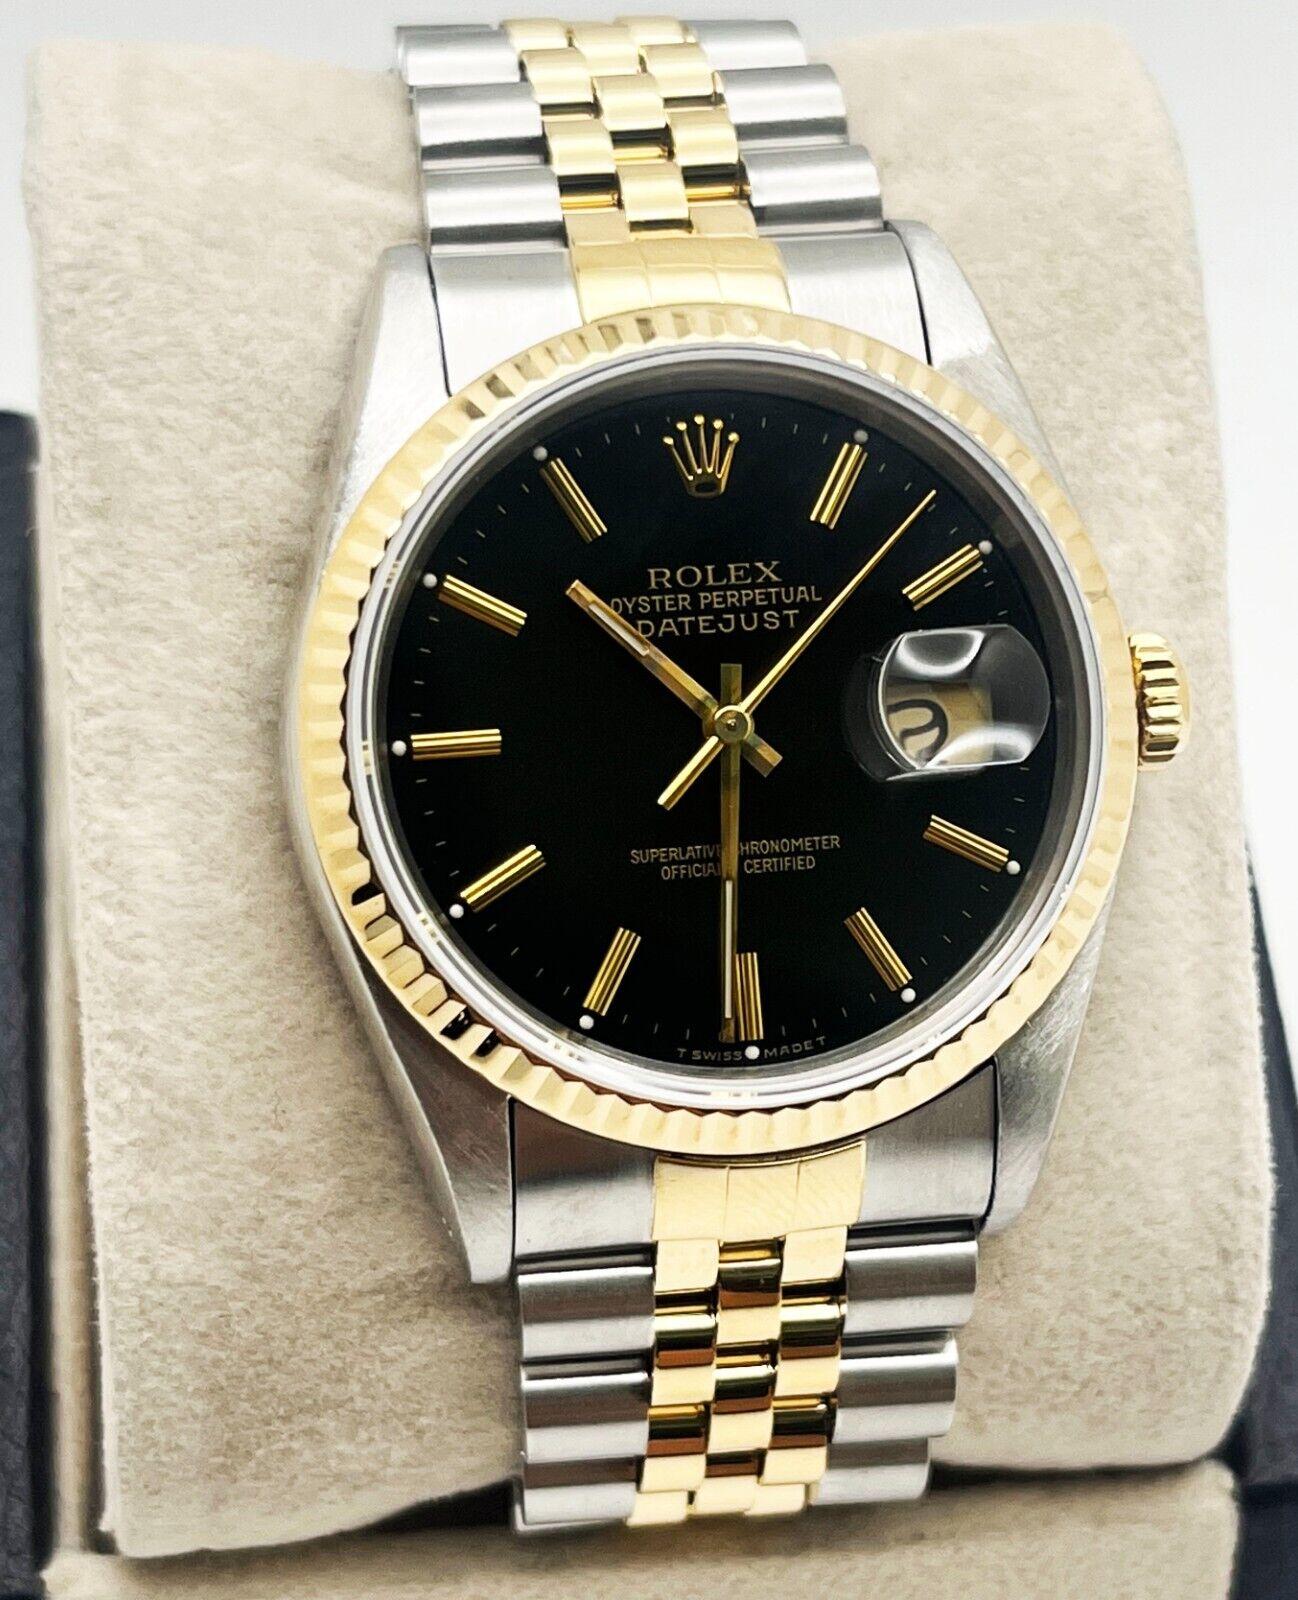 Style Number: 16233

Serial: X778***

Year: 1991
 
Model: Datejust
 
Case Material: Stainless Steel
 
Band: 18K Yellow Gold & Stainless Steel
 
Bezel: 18K Yellow Gold
 
Dial: Black
 
Face: Sapphire Crystal
 
Case Size: 36mm
 
Includes: 
-Elegant